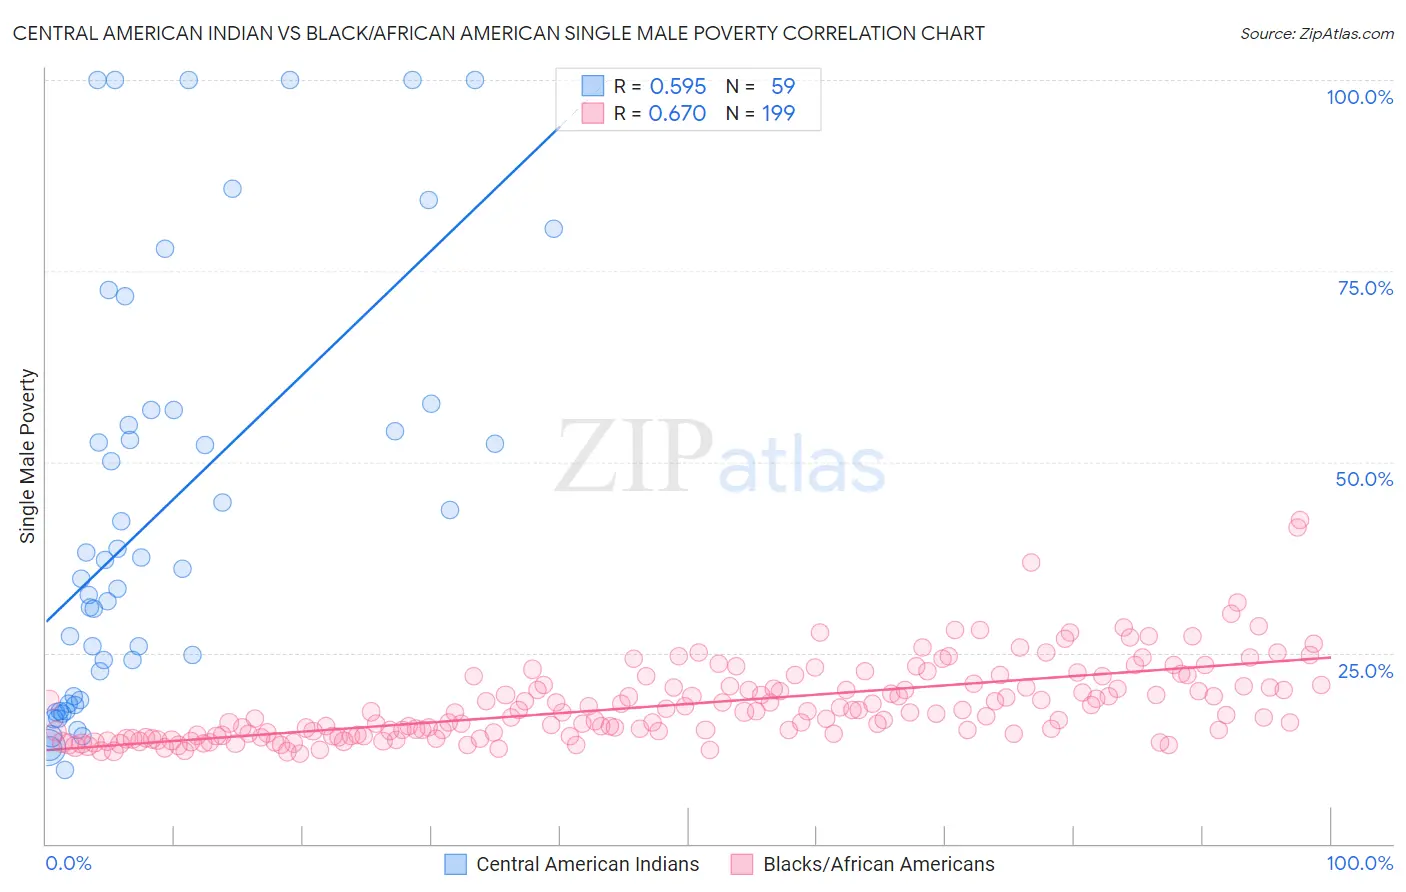 Central American Indian vs Black/African American Single Male Poverty